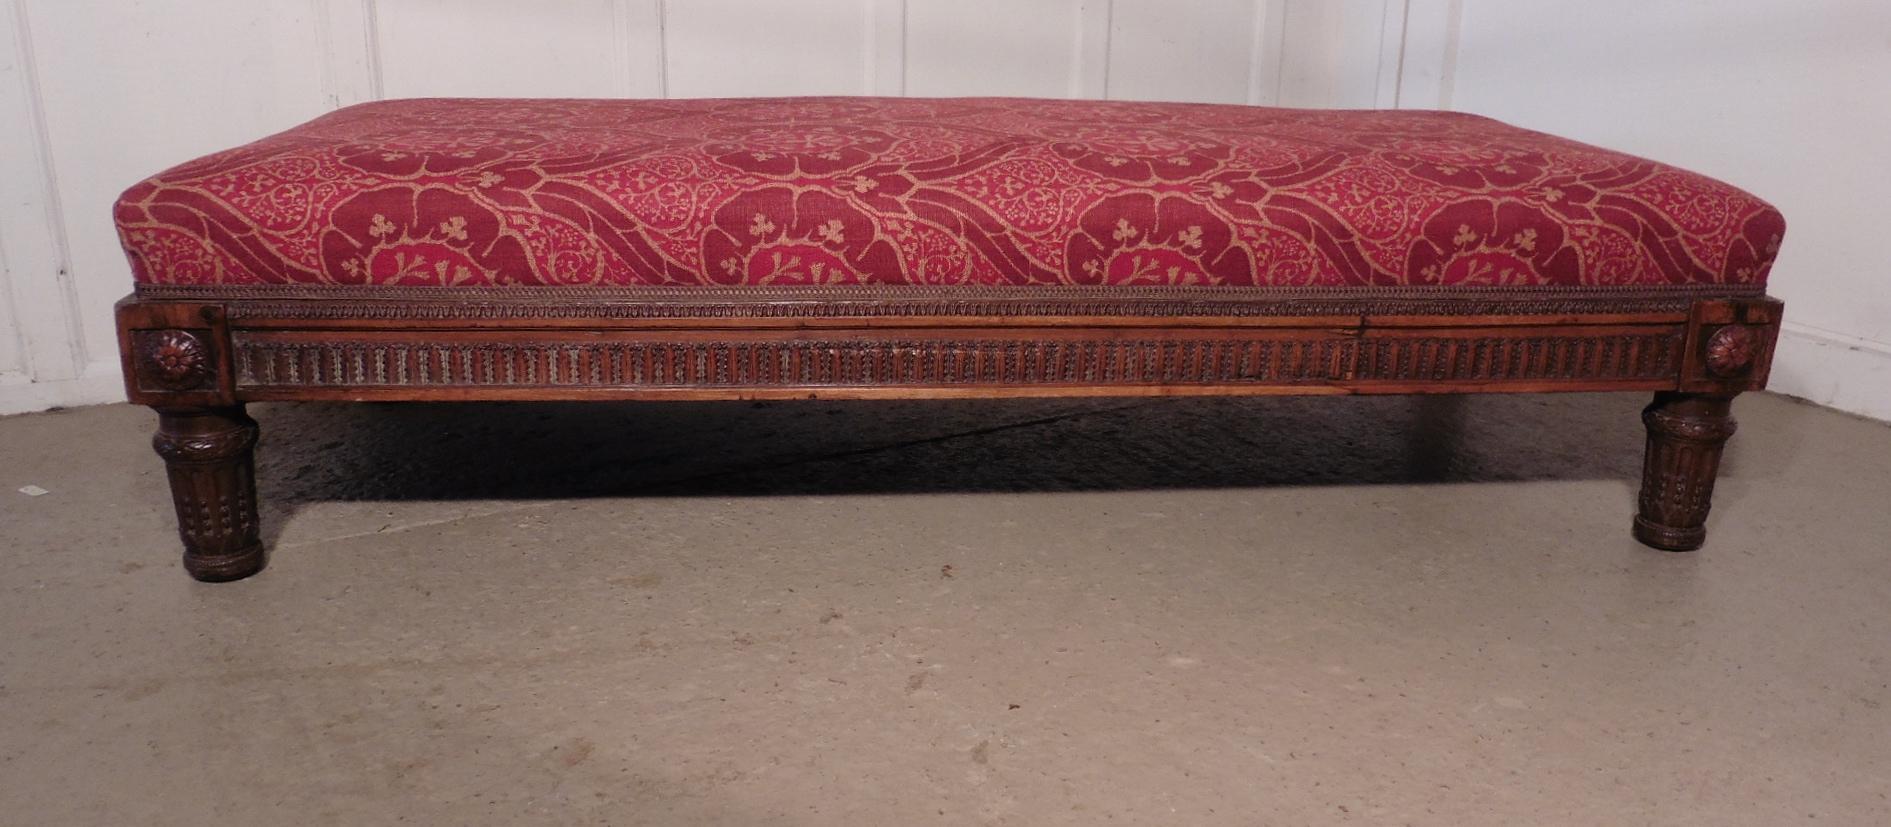 Charming 19th Century Upholstered Window Seat or Day Bed 2